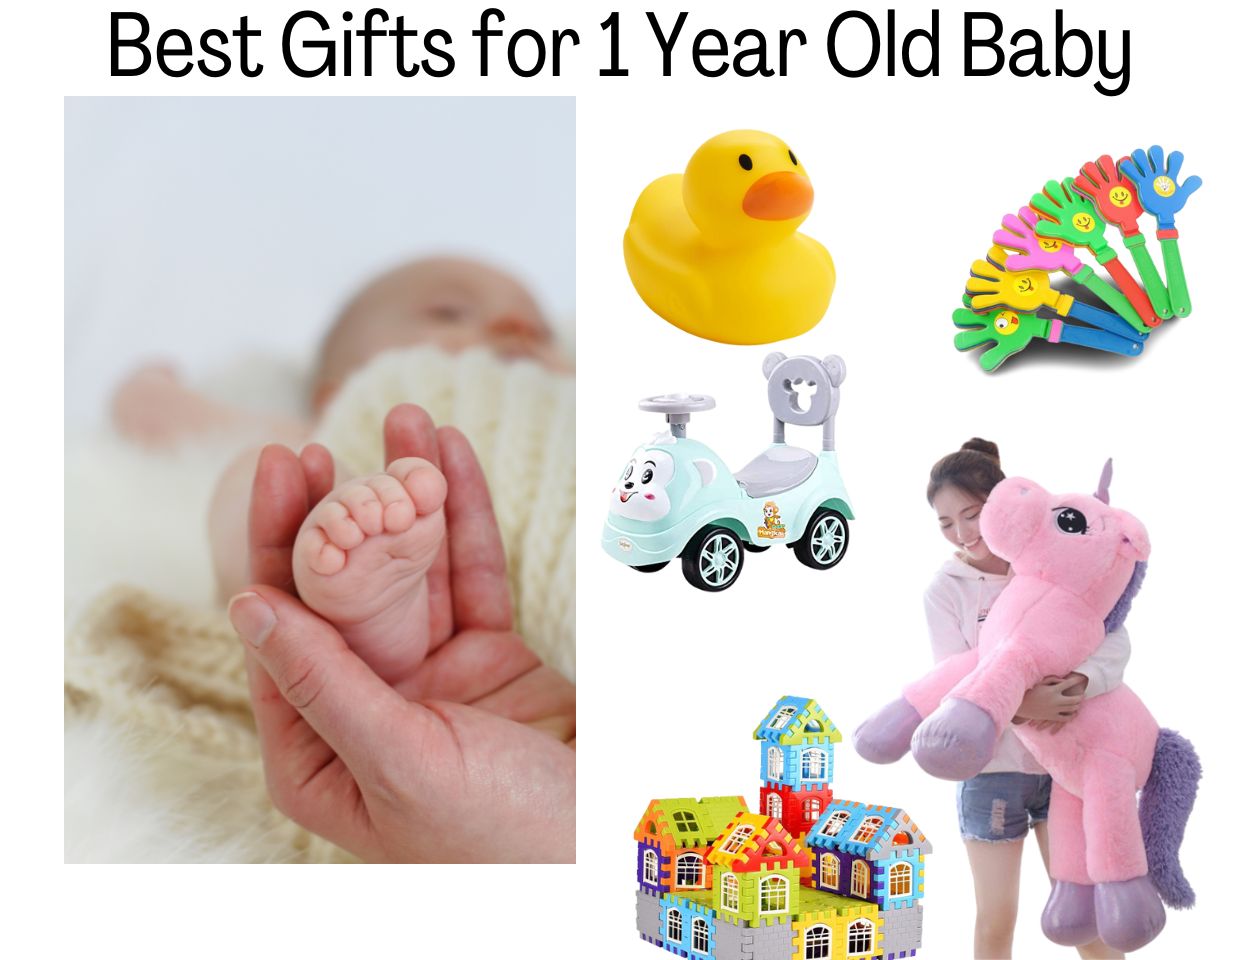 Best Gifts for 1 Year Old